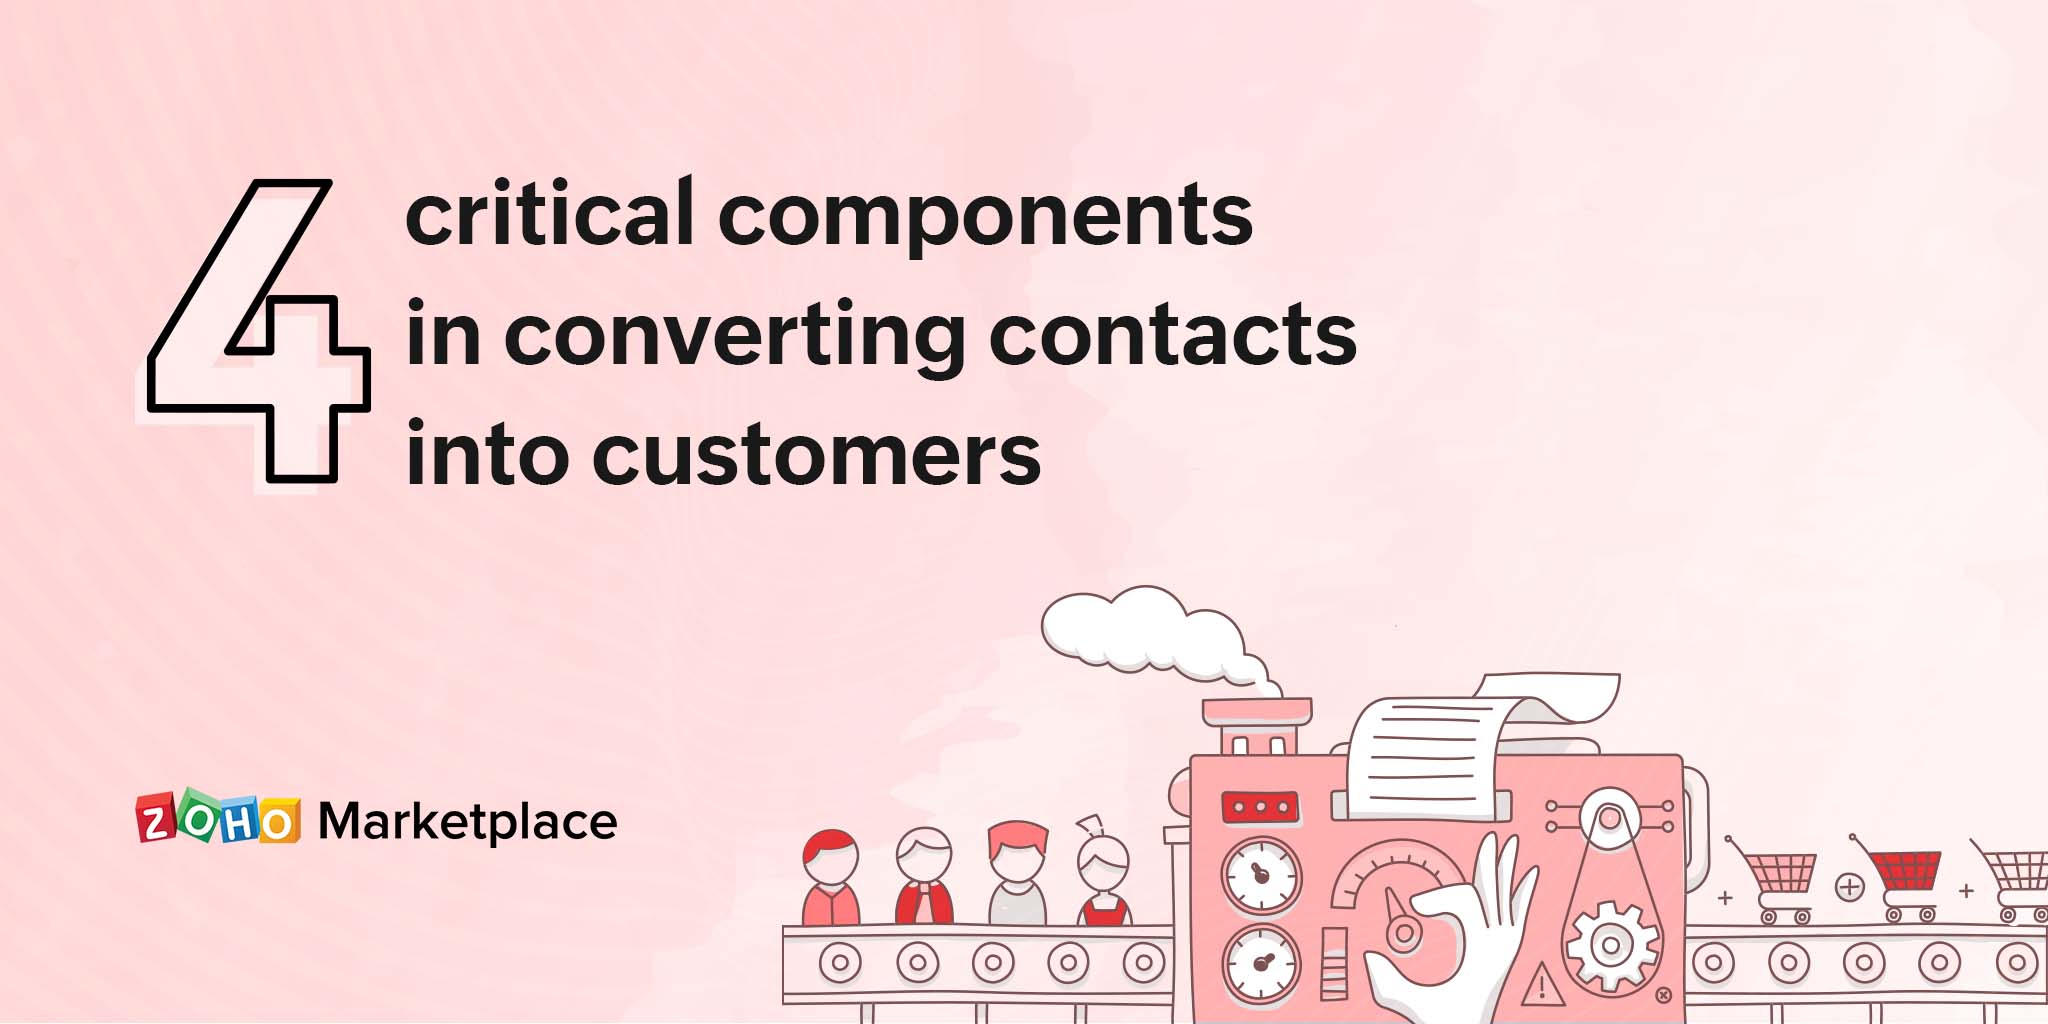 4 critical components in converting contacts into customers